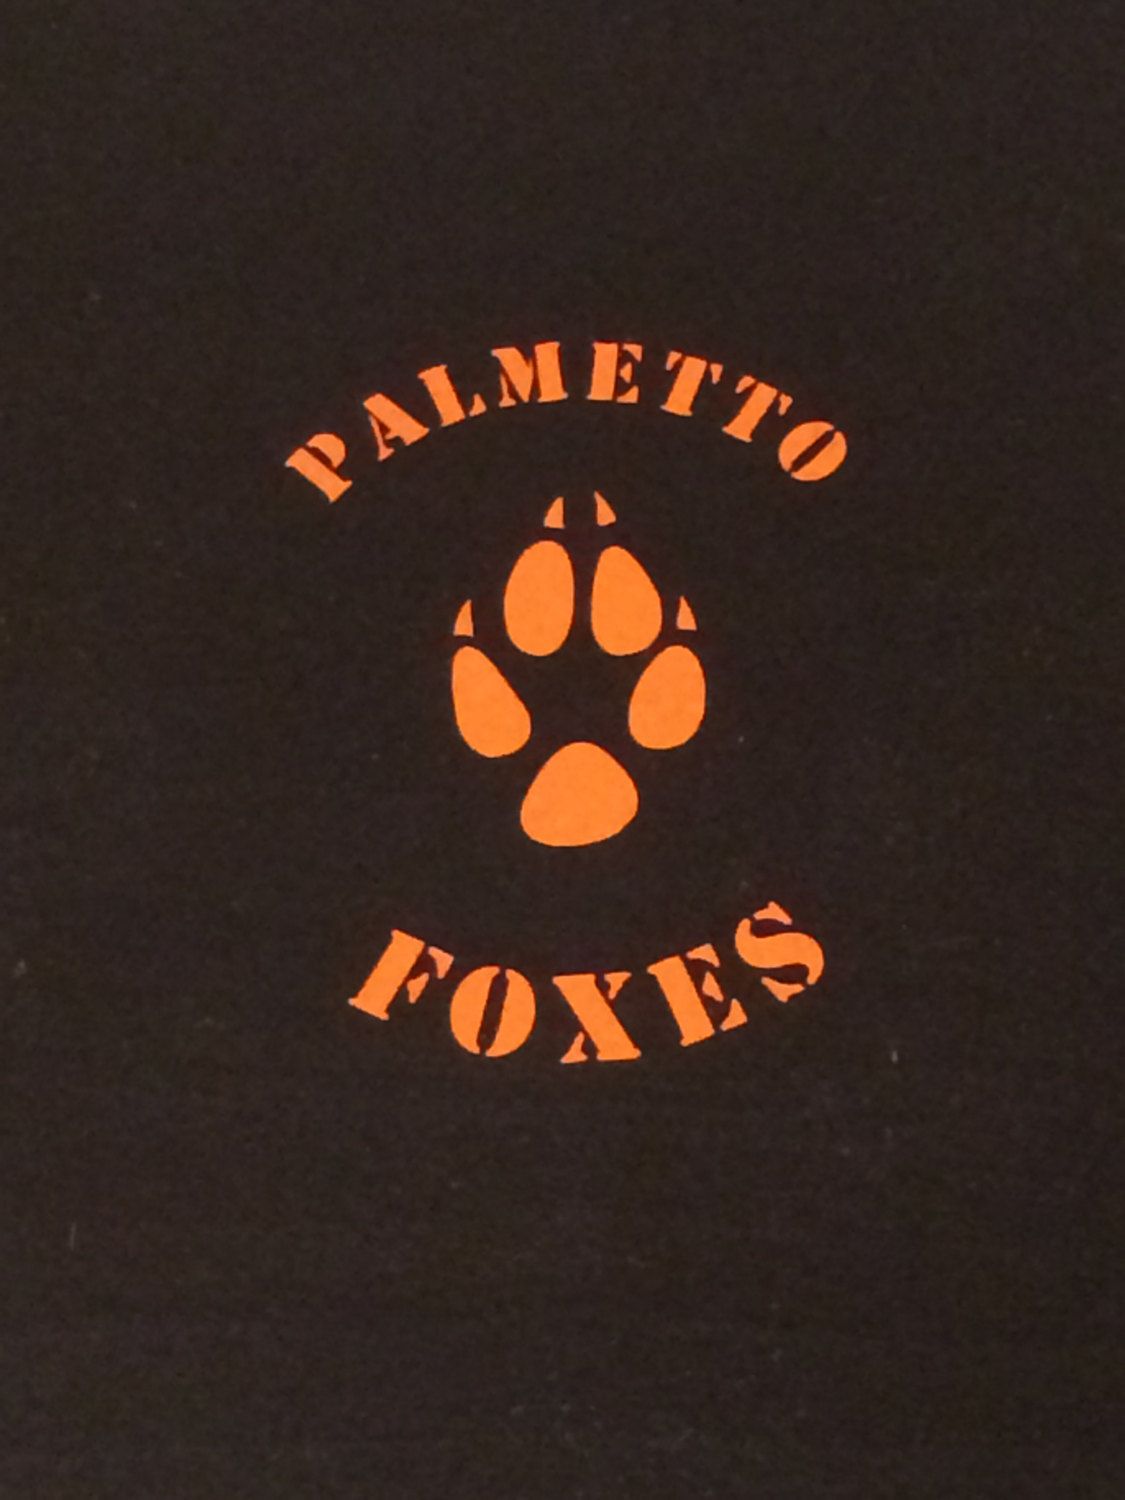 FREE SHIPPING! for the Game inspired decals. Palmetto State Foxes. The Foxhole Court. Two Styles and Multiple Colors Ava. The game book, Fox, Neil josten